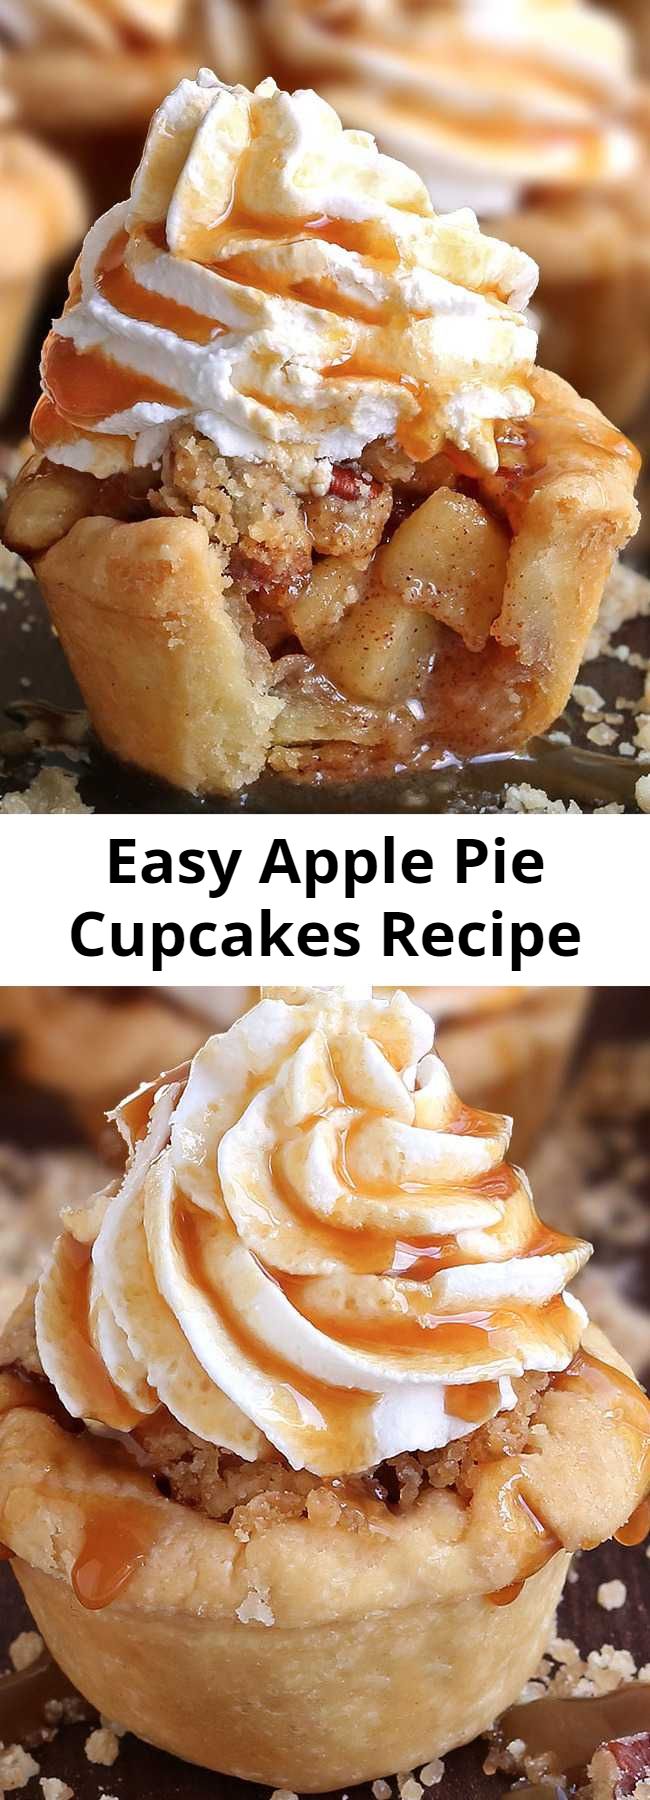 Easy Apple Pie Cupcakes Recipe - When you don’t feel like having an apple pie then these Apple Pie Cupcakes are just the best alternative that you can get. With press-in crusts, easy apple pie filling and a simple crumb topping, these cupcake-sized desserts don’t require any special rolling, weaving, or fluting skills to create impressive little treats.